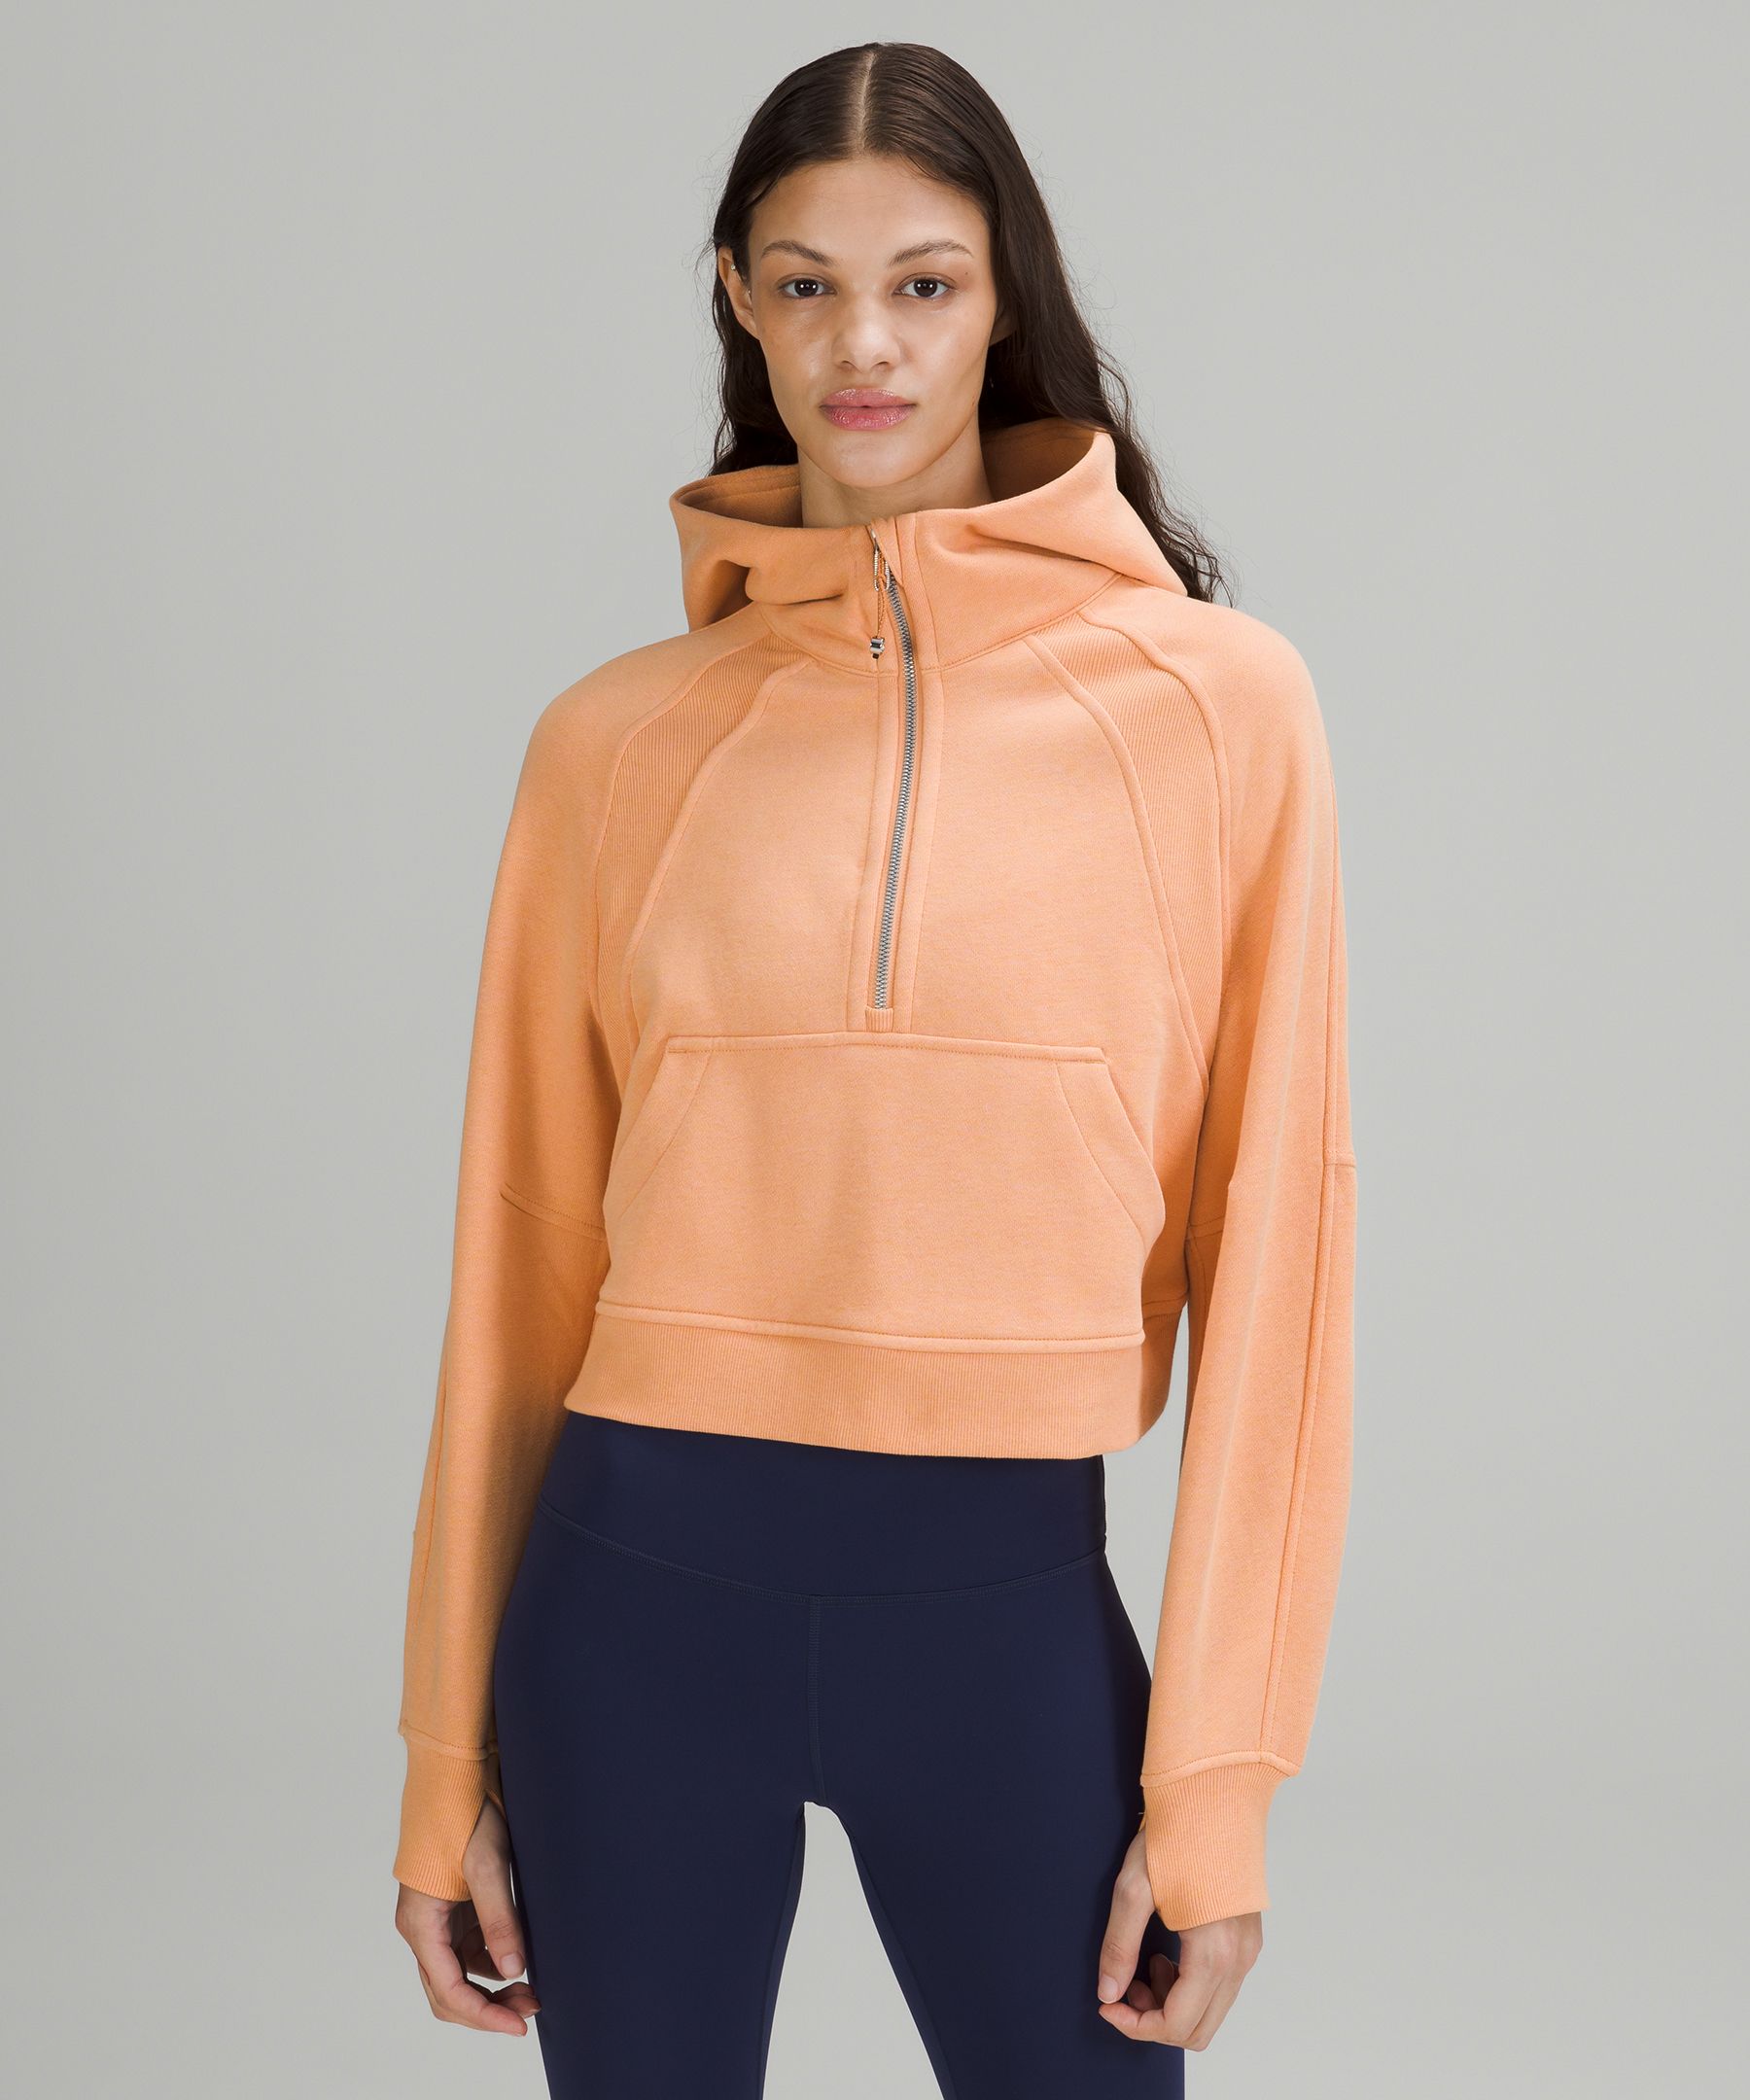 Lululemon shoppers are obsessed with this fleece Scuba hoodie for fall and  winter